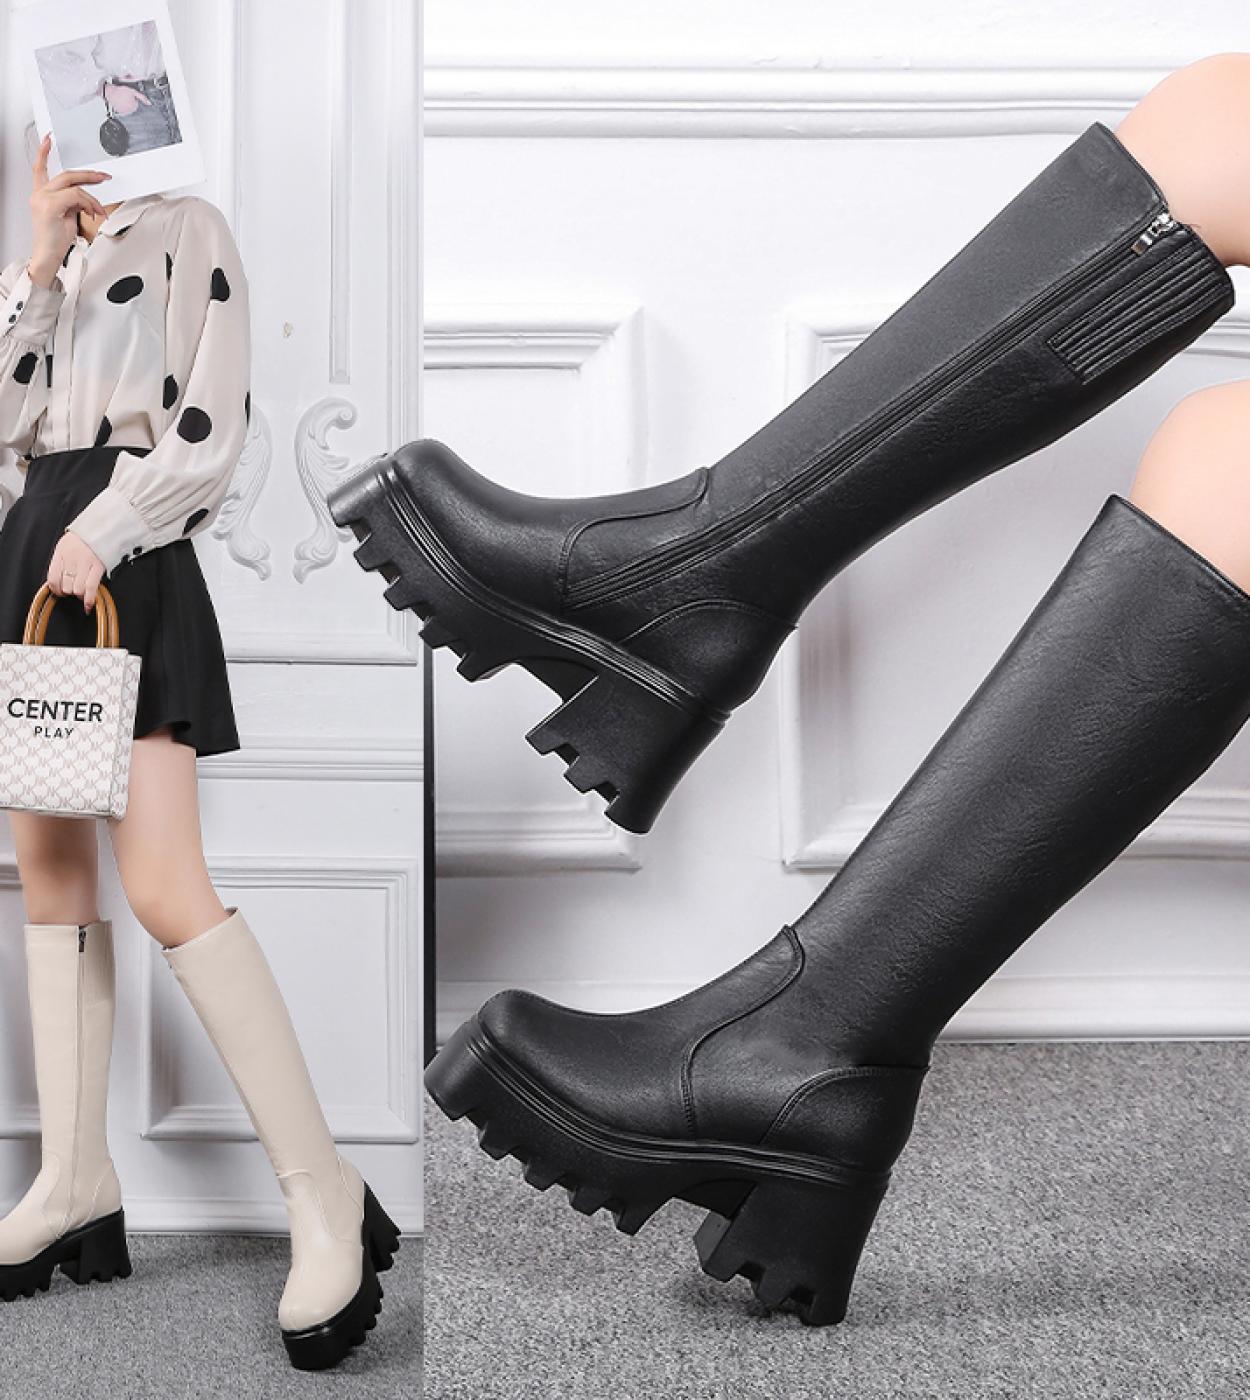 Large Size 43 Thick Platform Extreme High Heels 17cm Cool Motorcycles Boots  Punk Style Shoelaces Knee High Boots Winterk Color Black Shoe Size 35